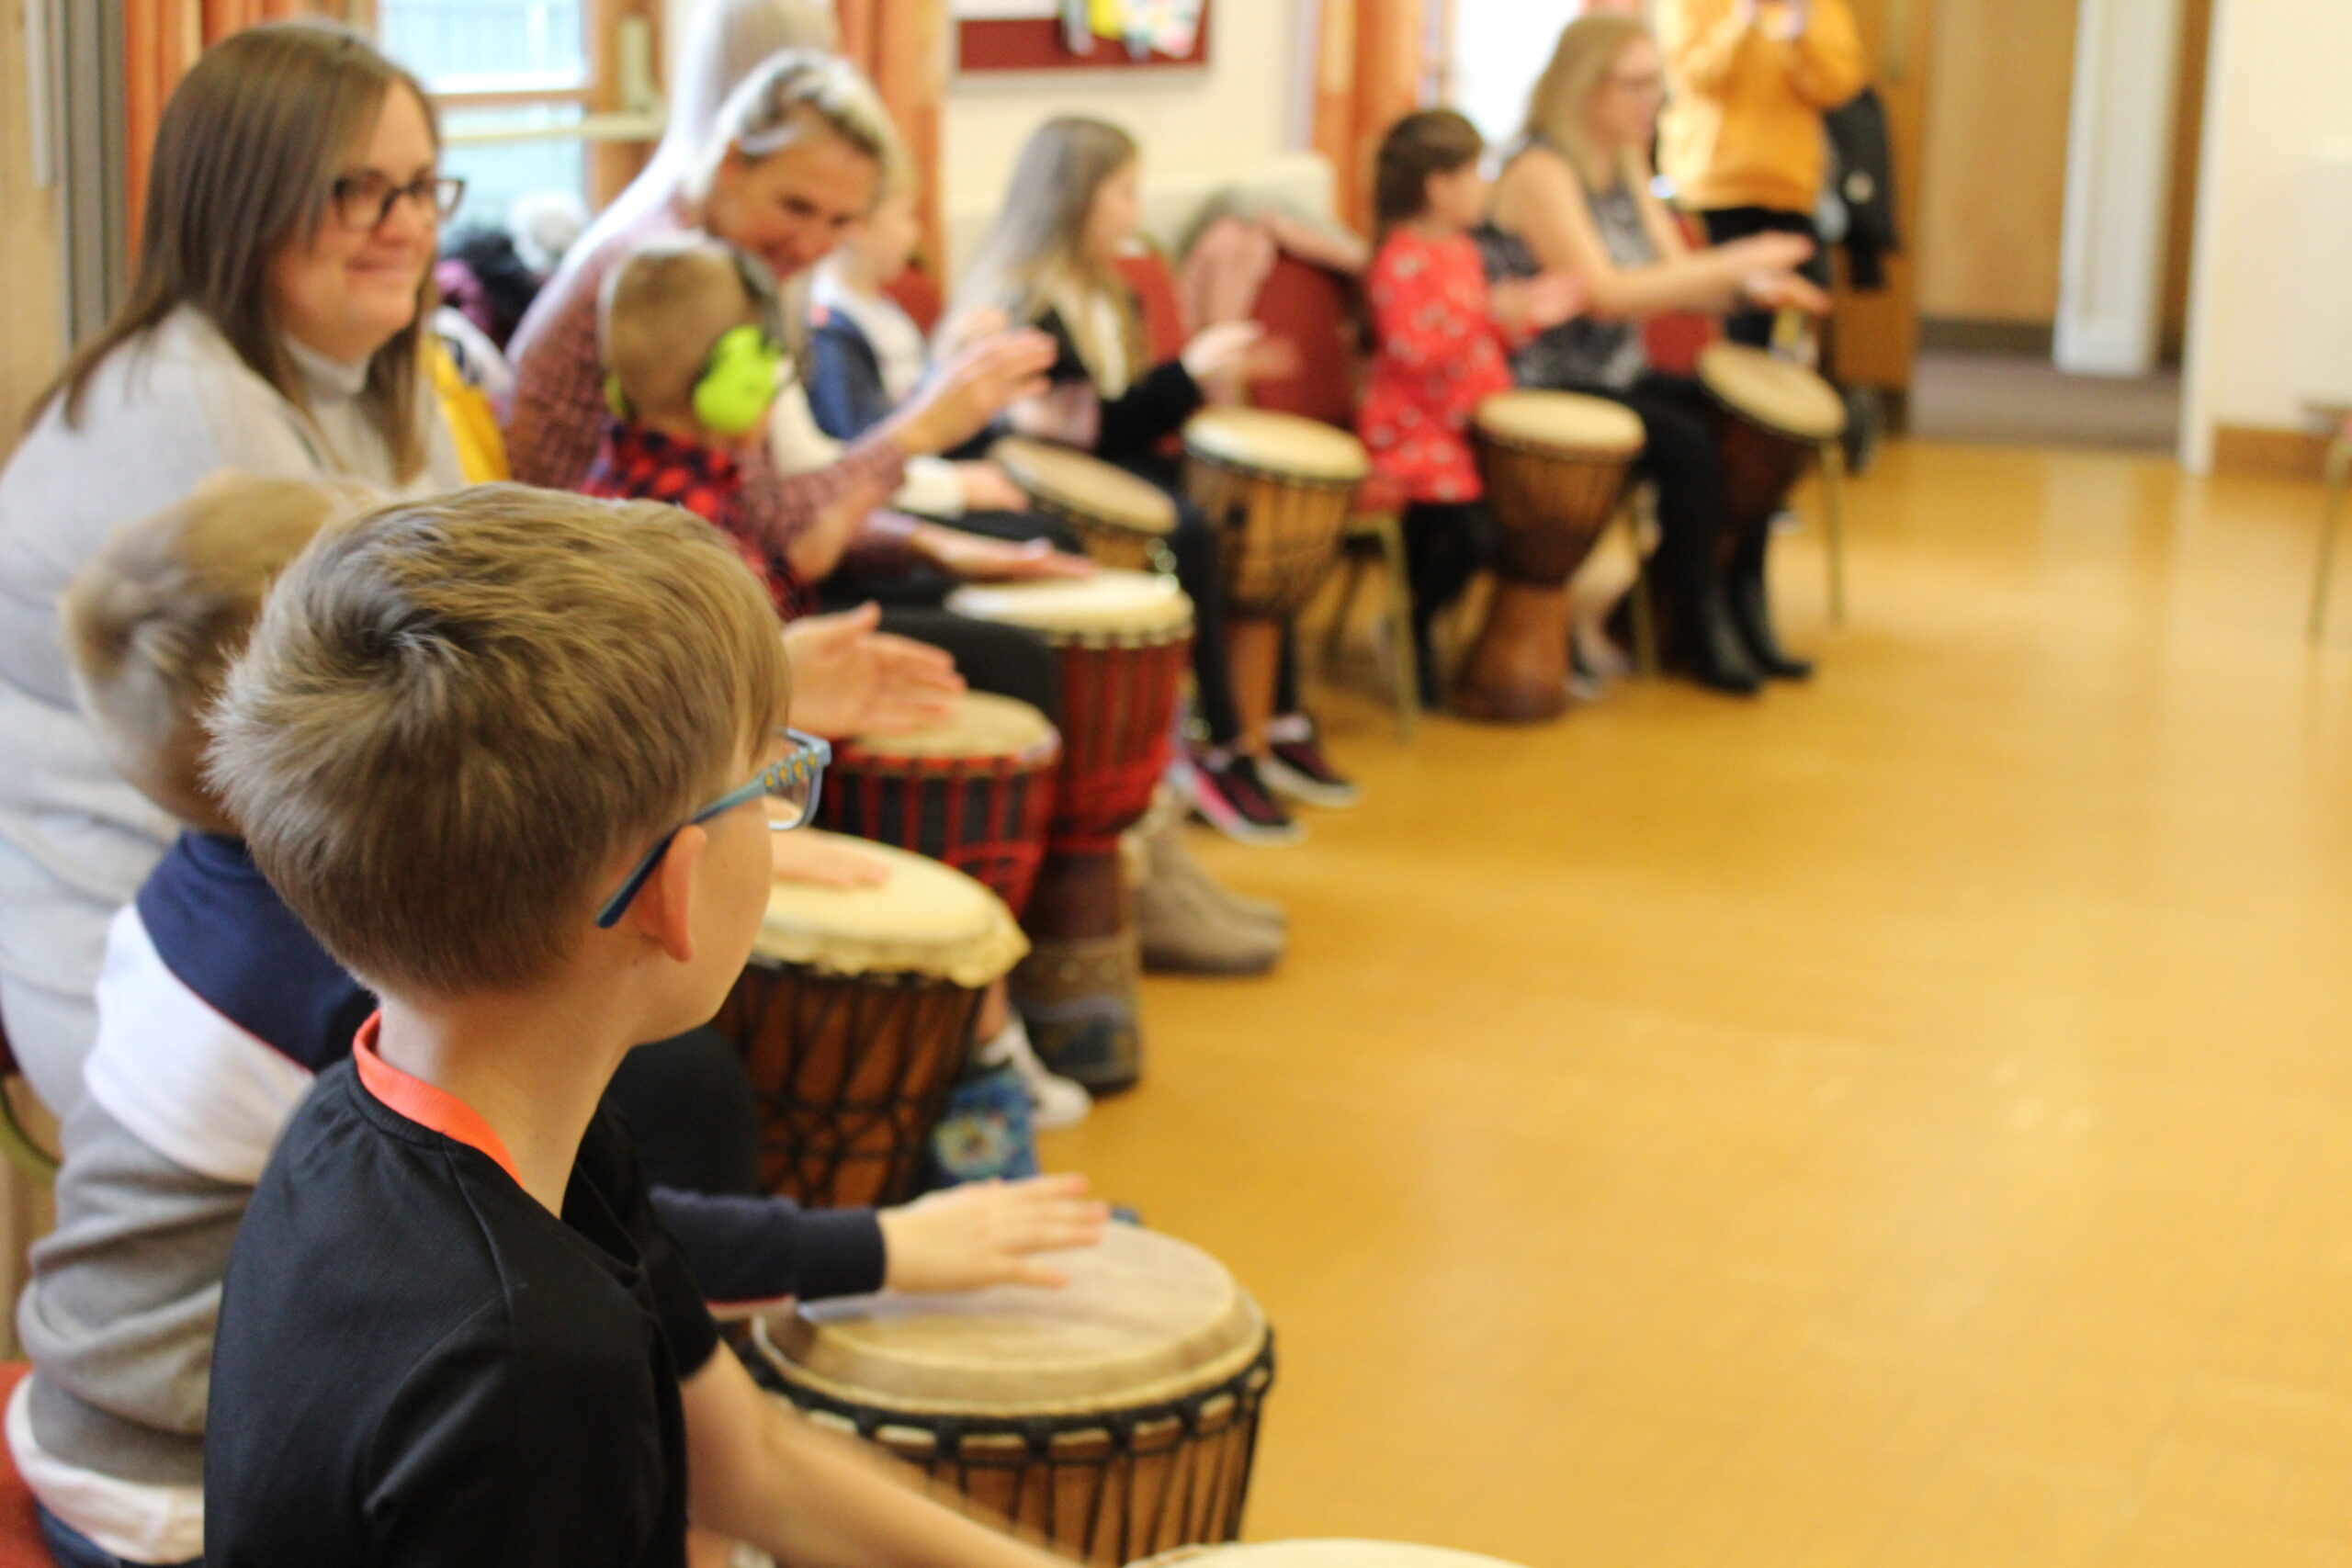 Group of children sitting playing big drums in a room